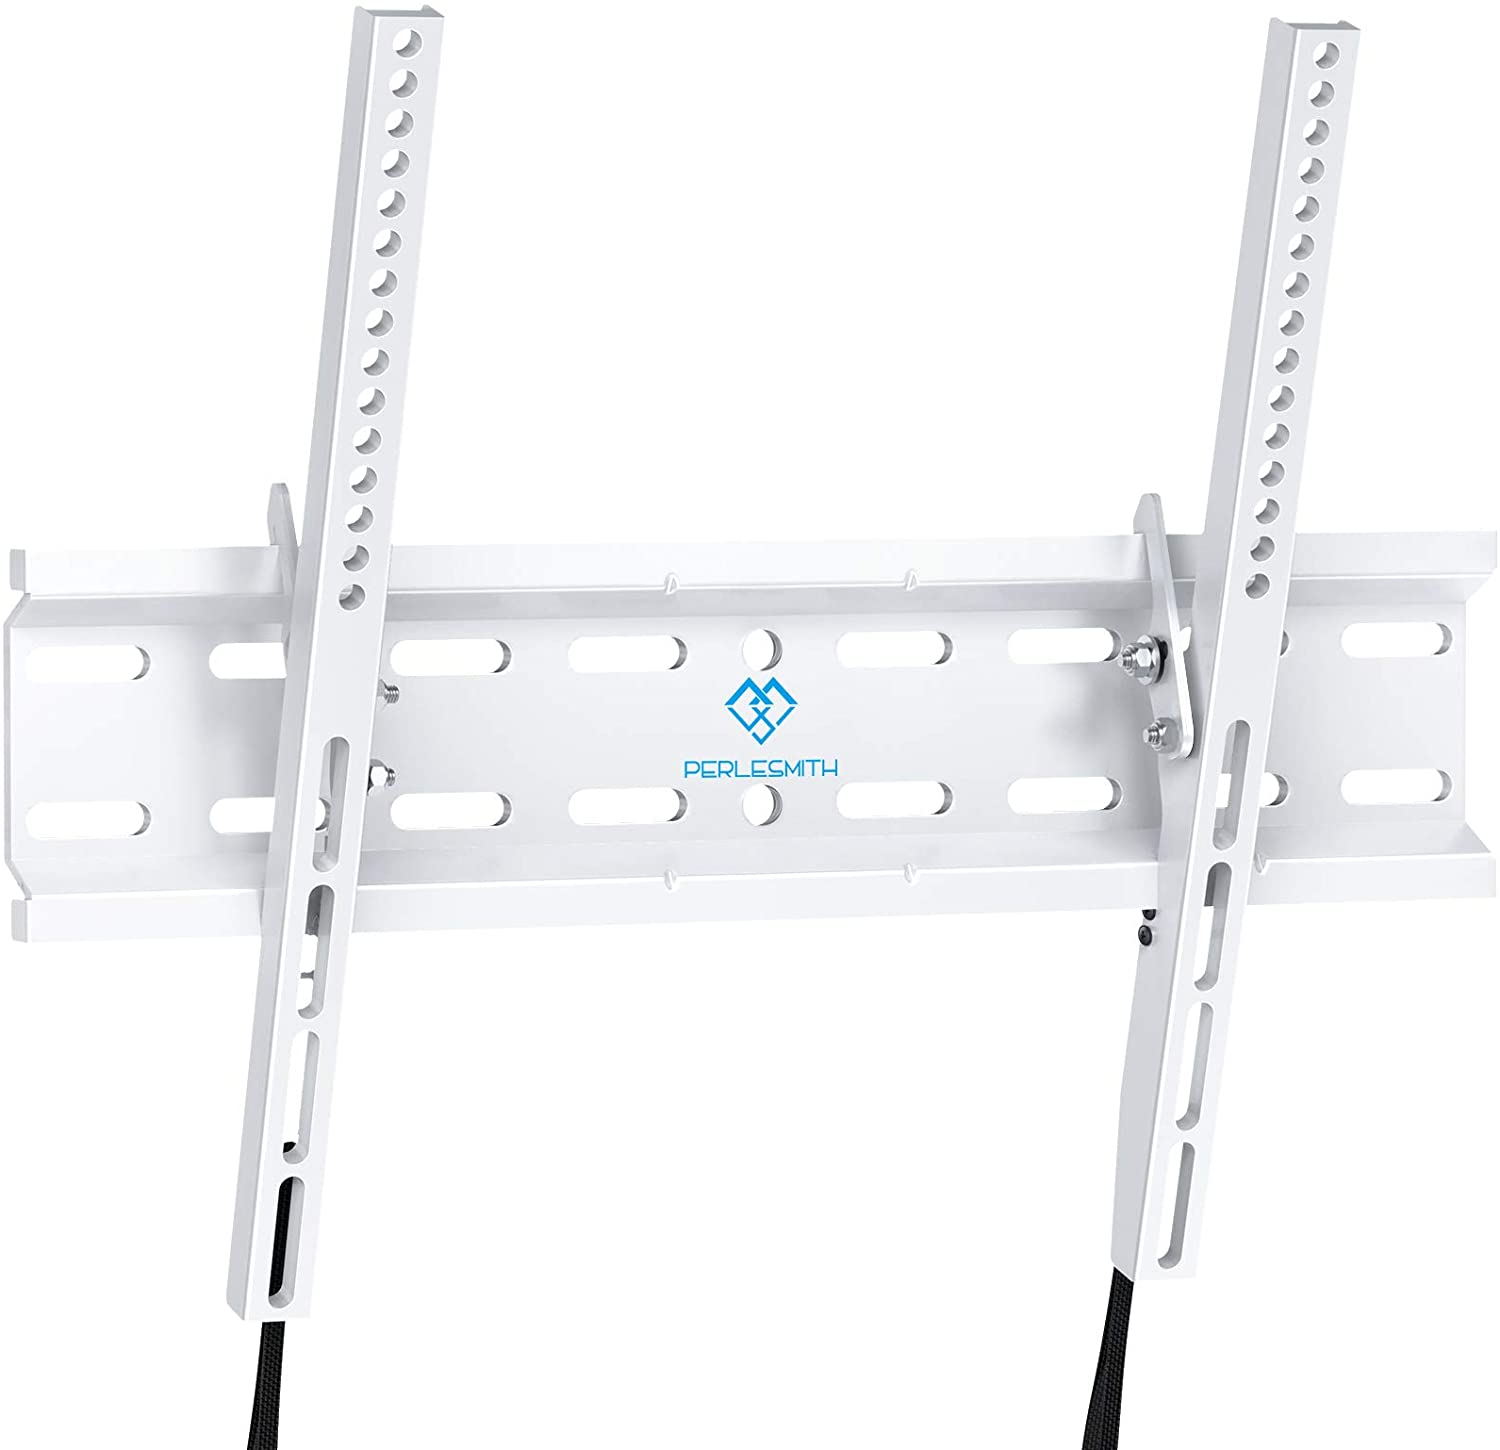 Perlesmith Tilting TV Wall Mount Bracket Low Profile for Most 23-55 Inch for $8.99 + Free Shipping w/ Prime or $25+